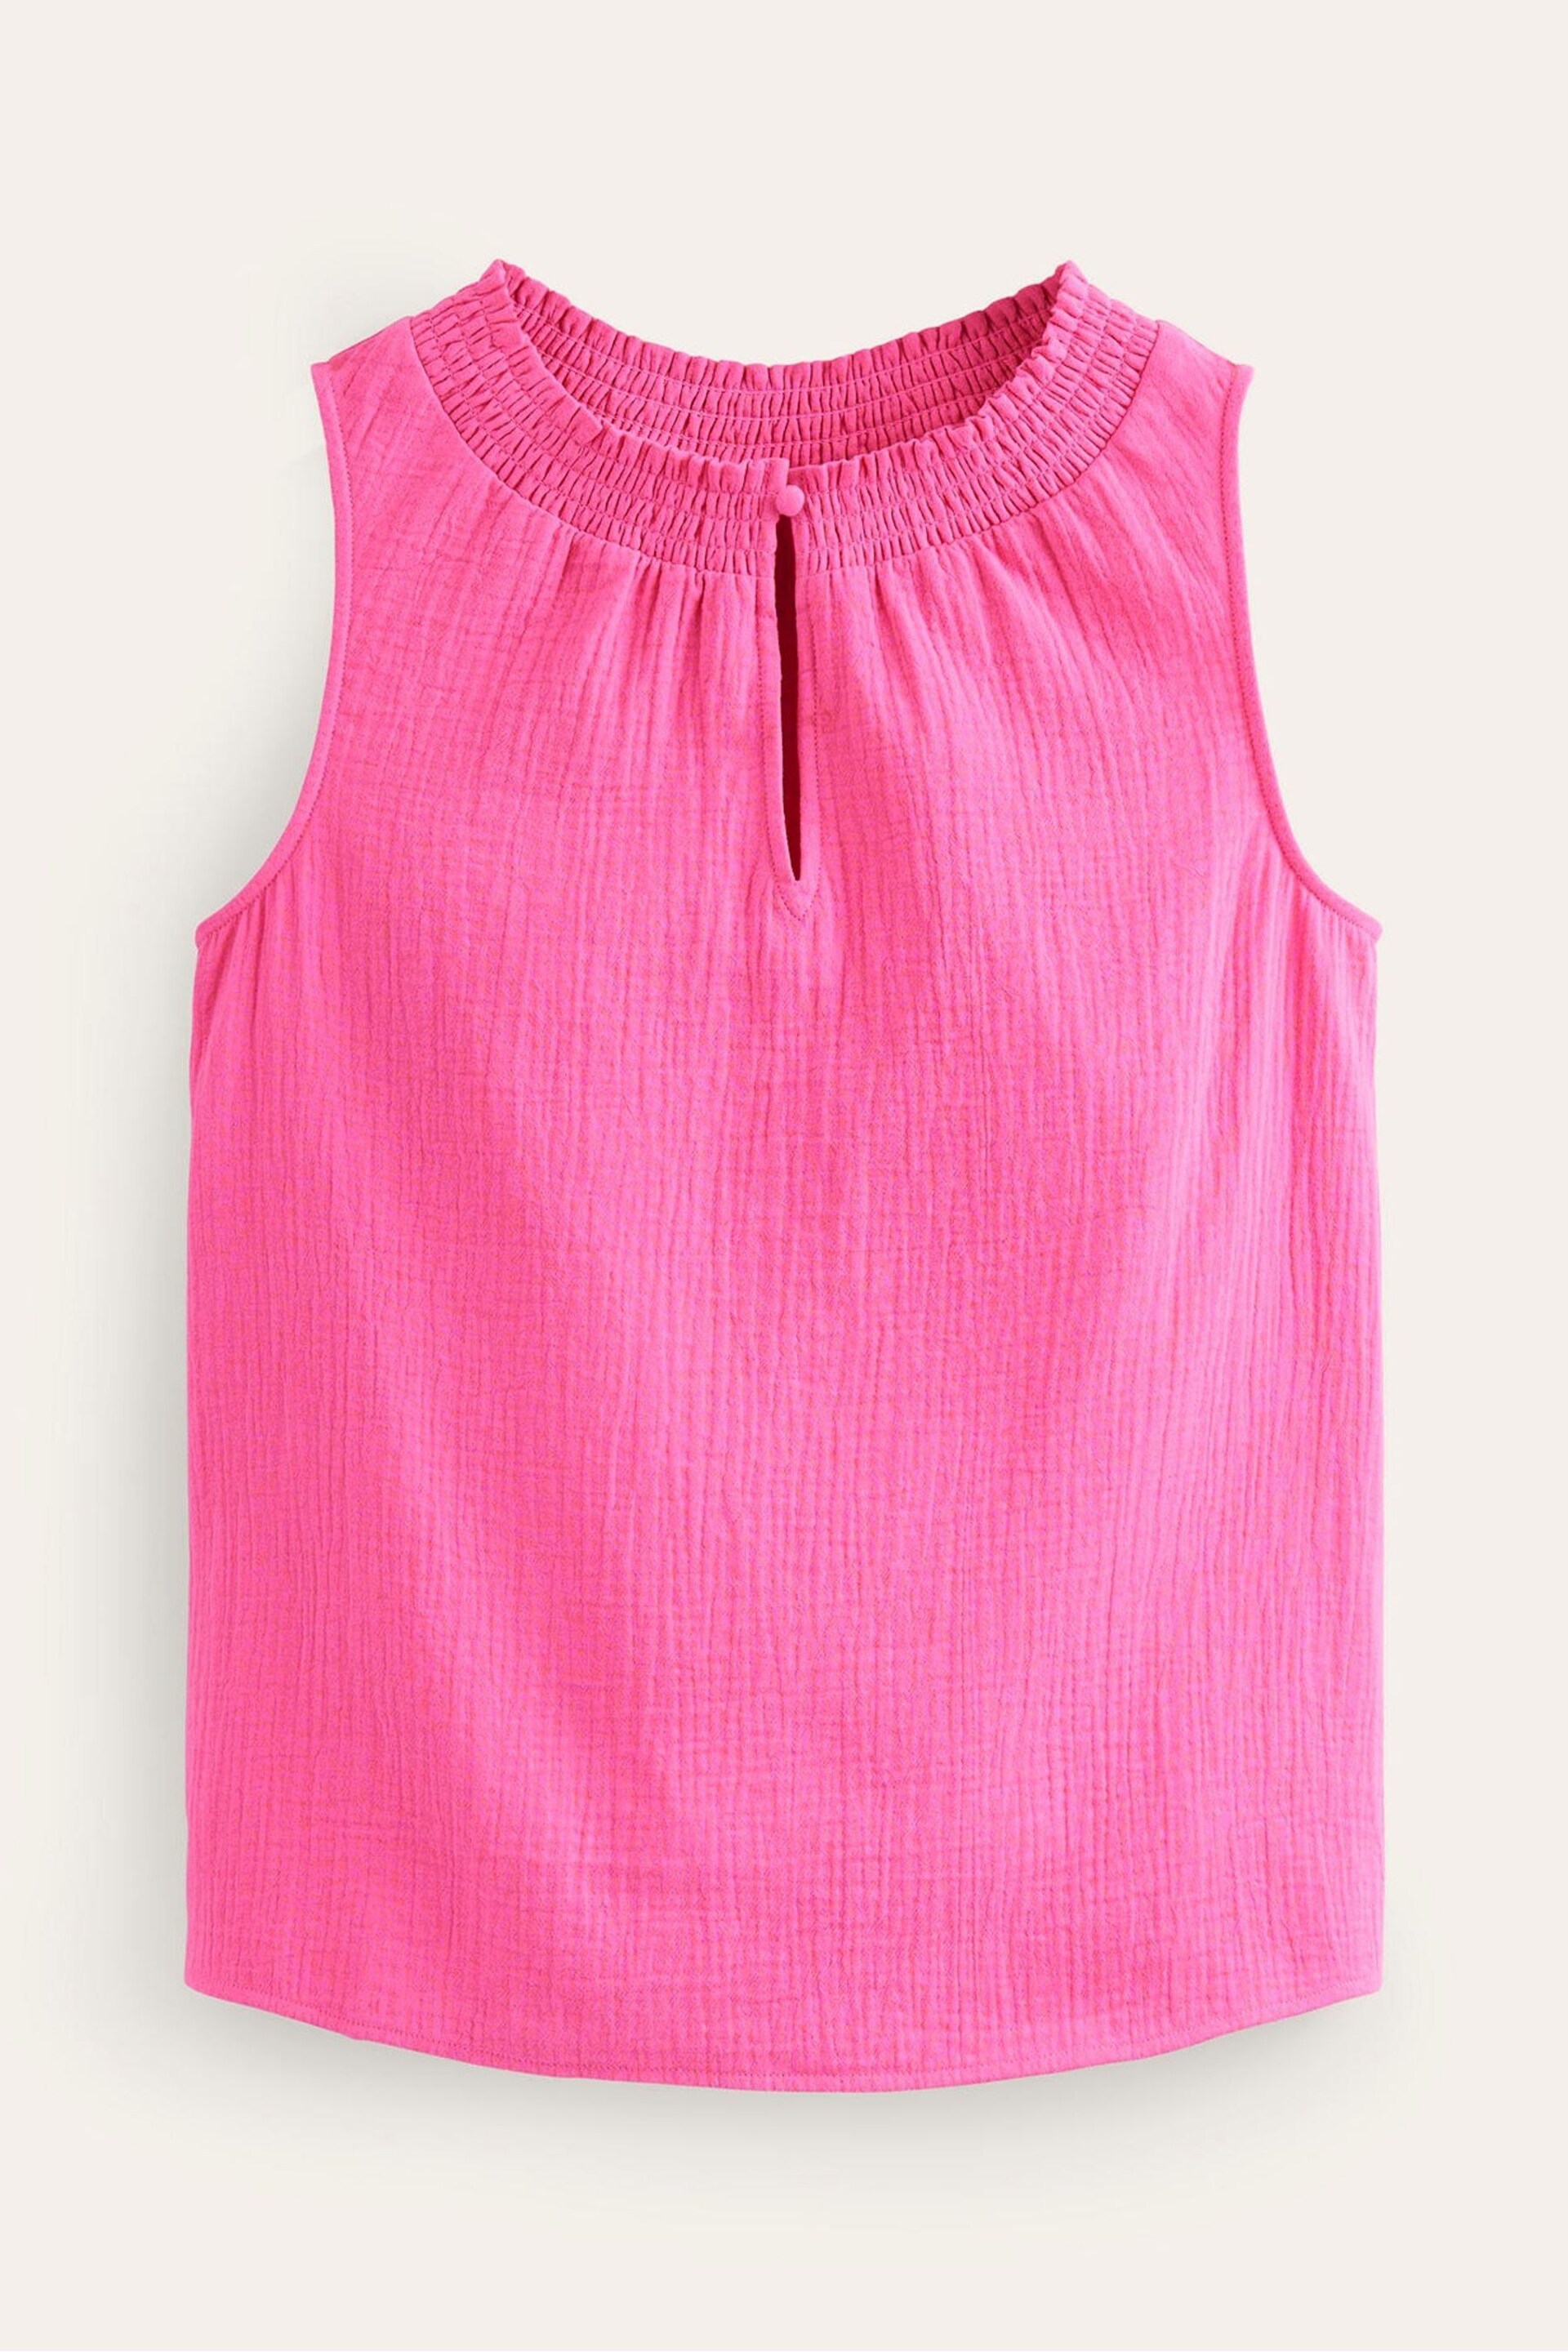 Boden Pink Georgia Double Cloth Top - Image 5 of 5